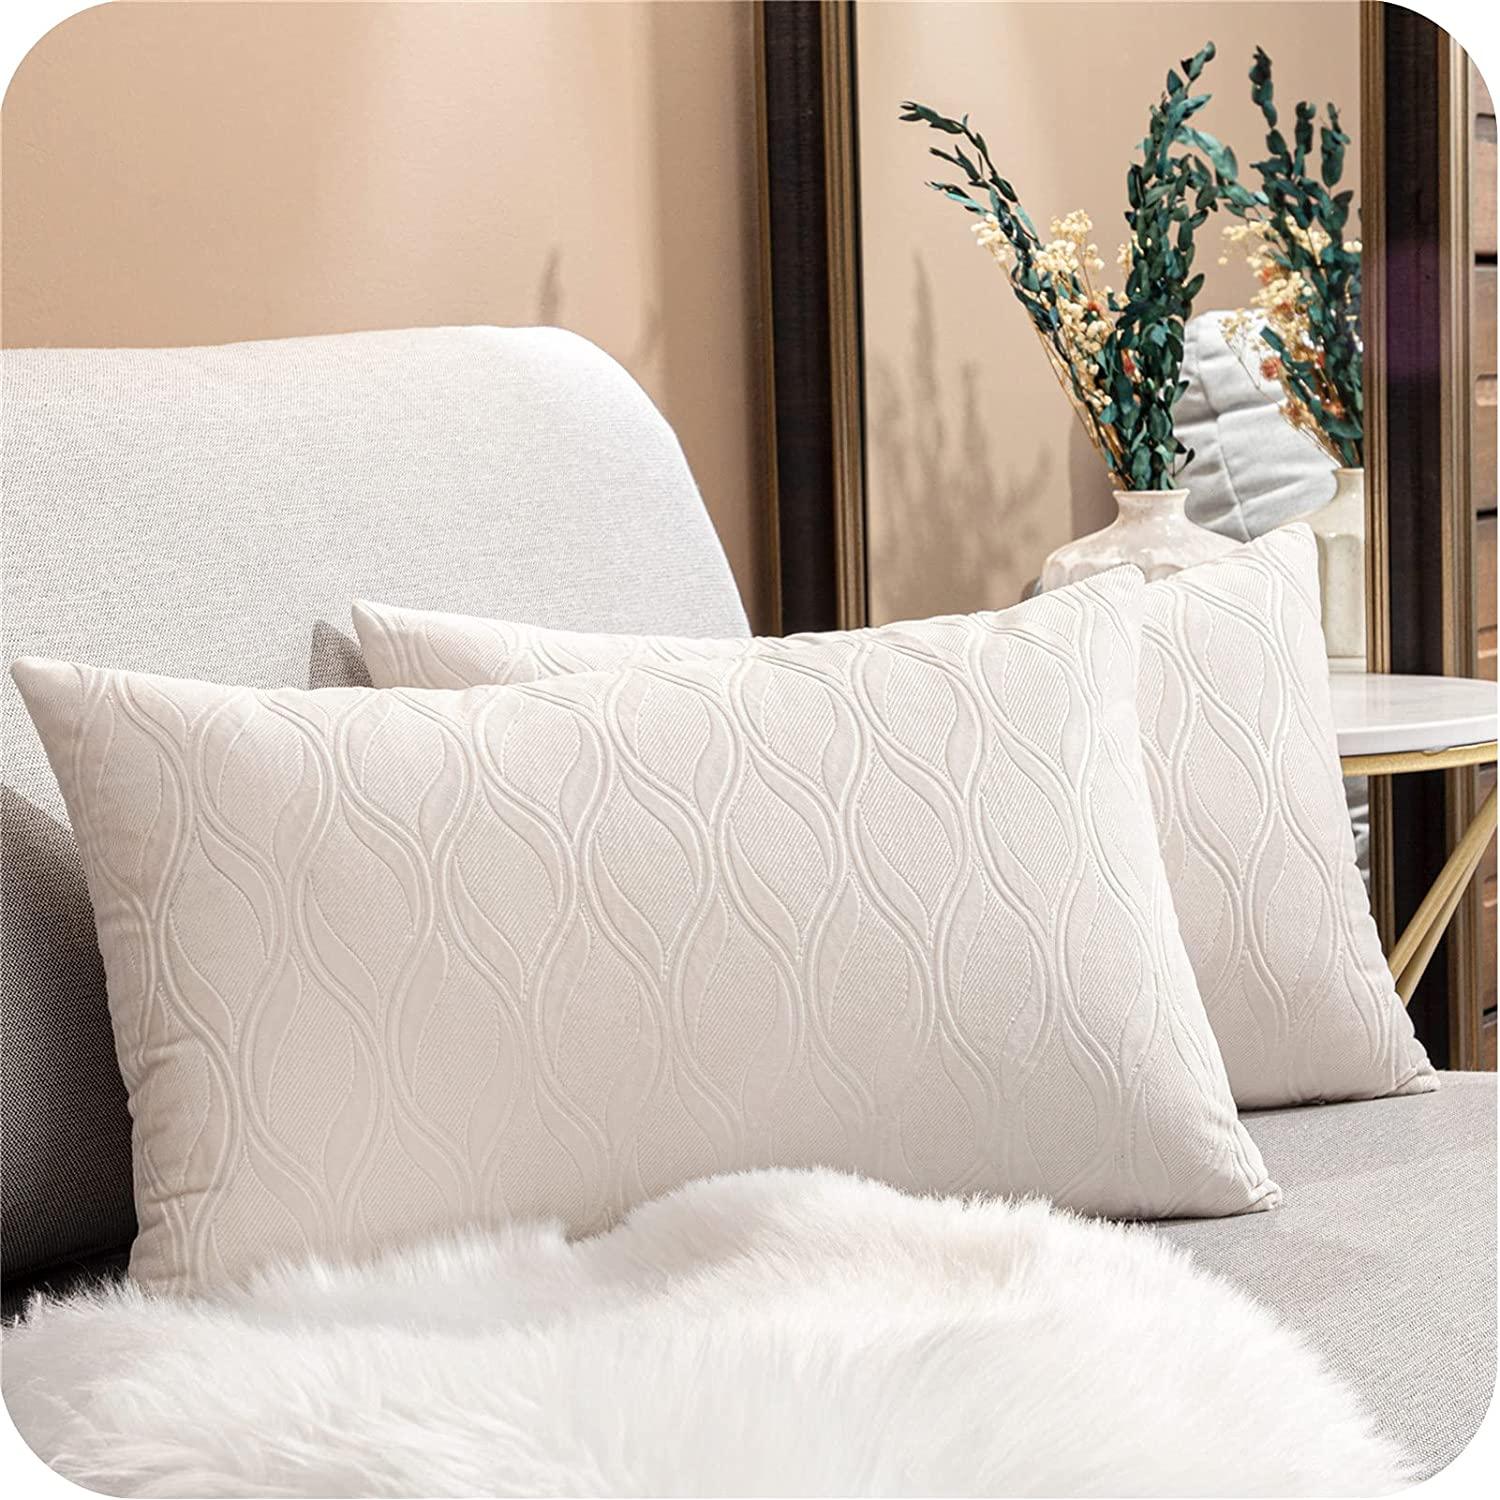 Velvet Solid Color Pillow Cover with Wave Pattern for Sofa Bedroom Office Car Set of 2 - Topfinel